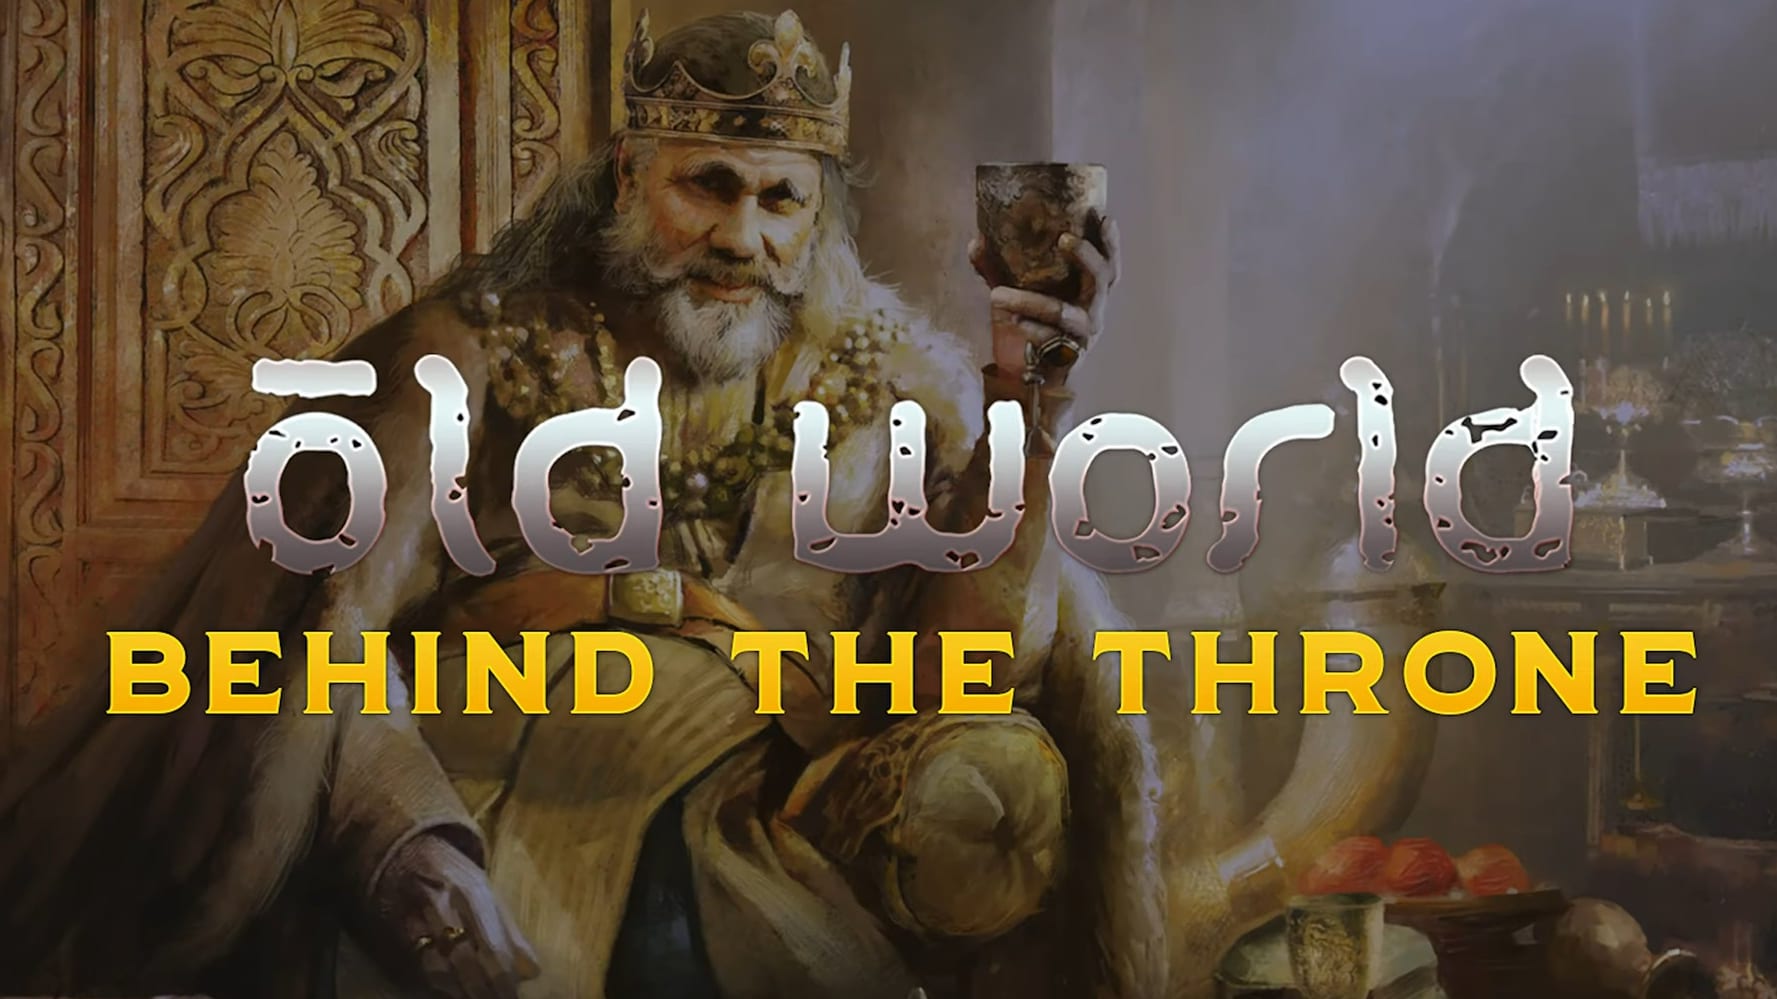 Old World Behind the Throne DLC artwork showing a king toasting with a chalice in hand.